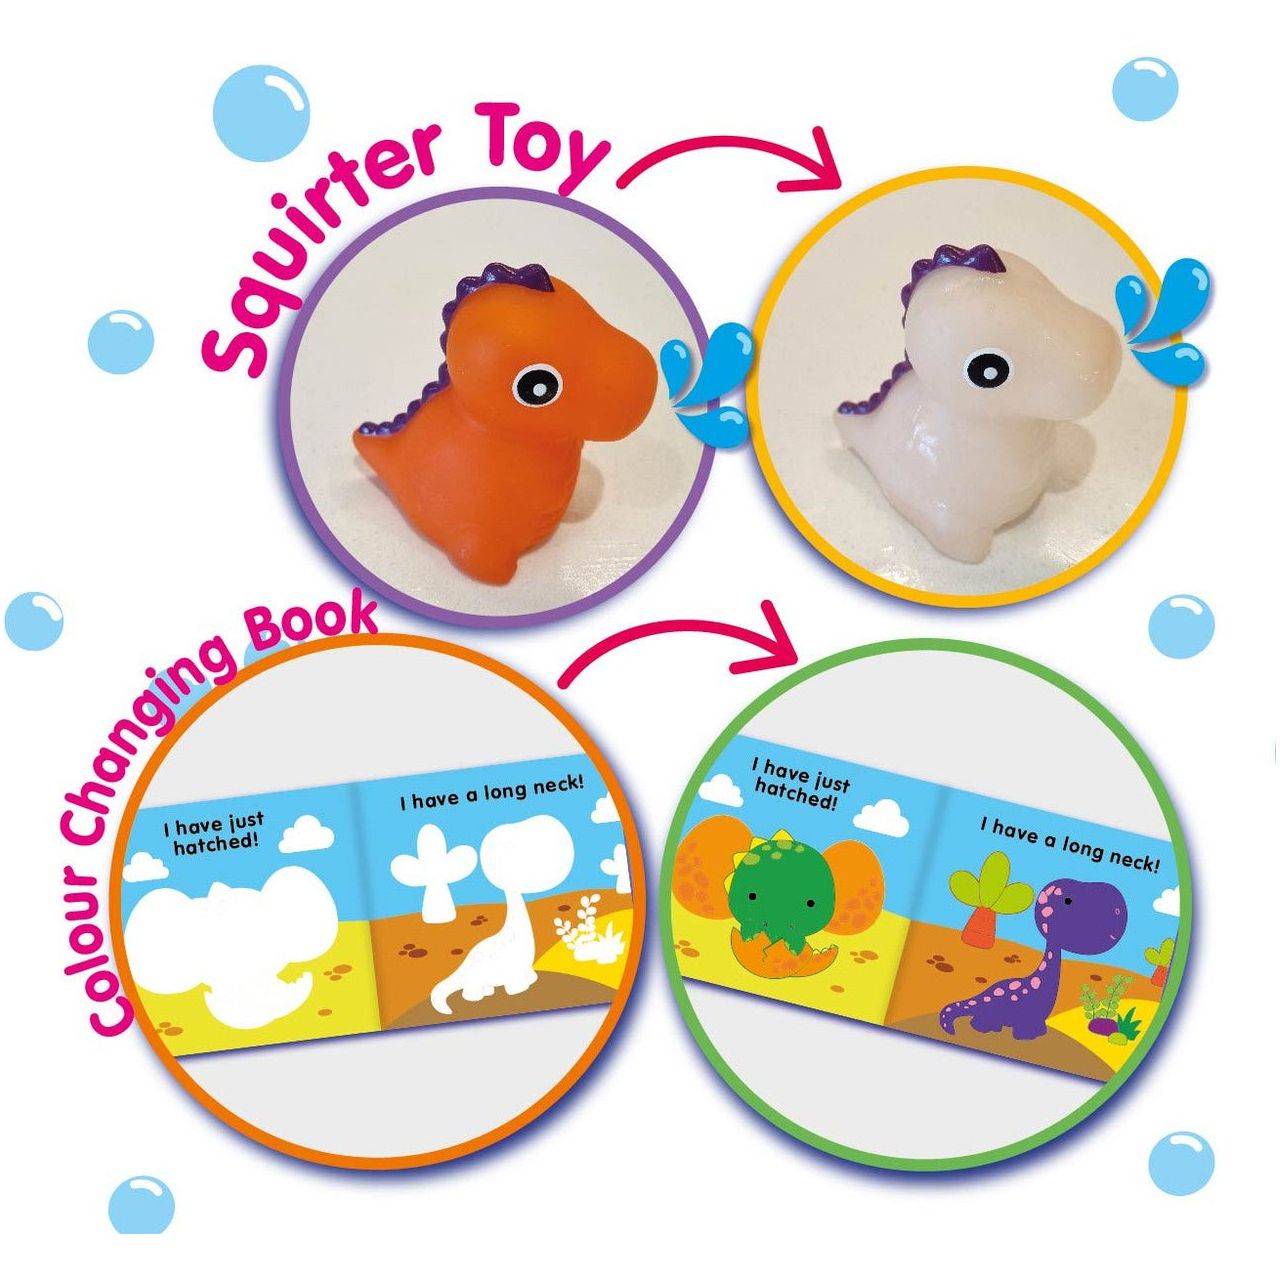 Magic Colour Changing Bath Time Book and Toy - Buddy & Barney - Toybox Tales